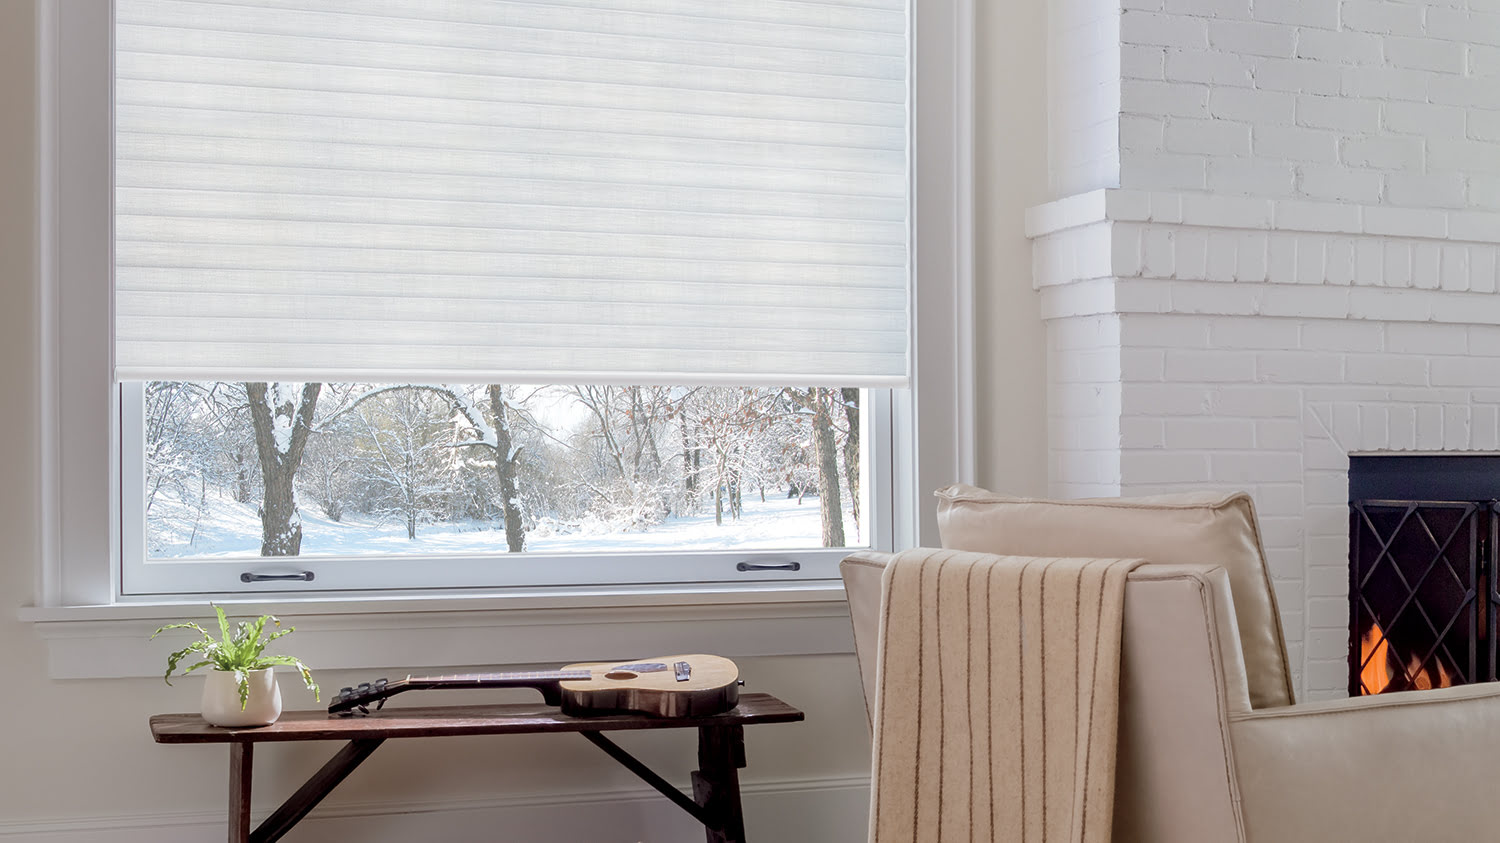 How To Lower Window Blinds